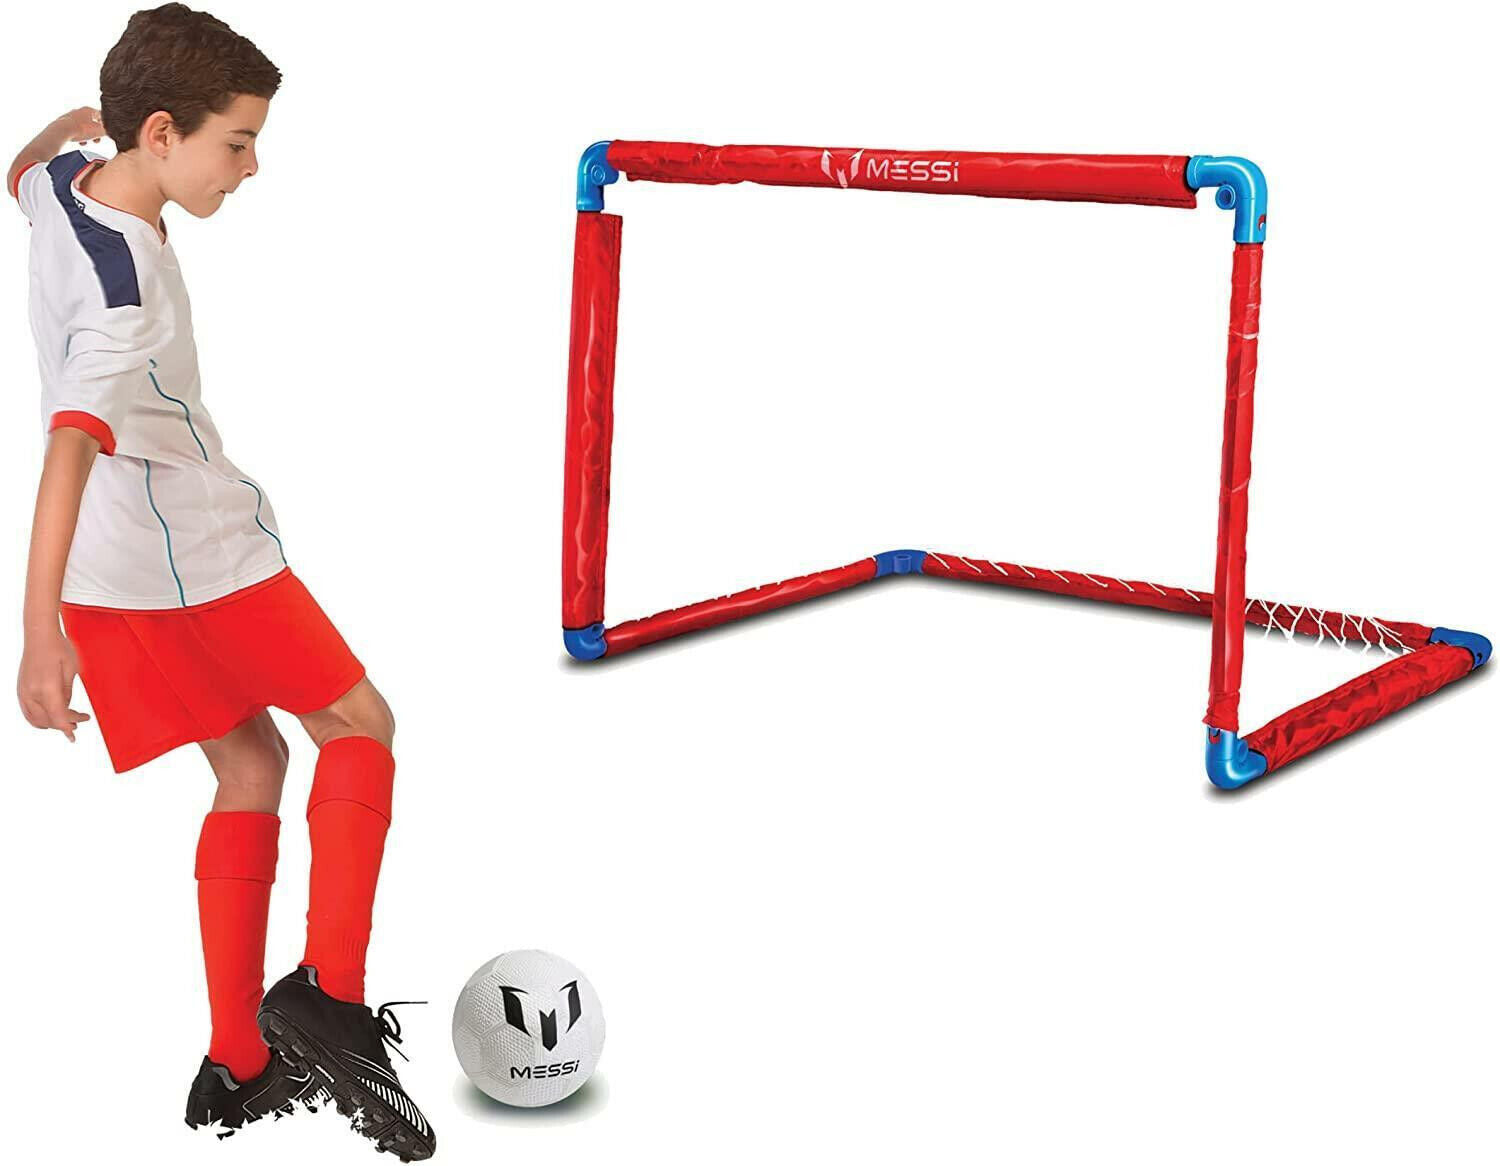 Get Your Little Messi Ready with Football Training Balls, Goals and Sets for Age